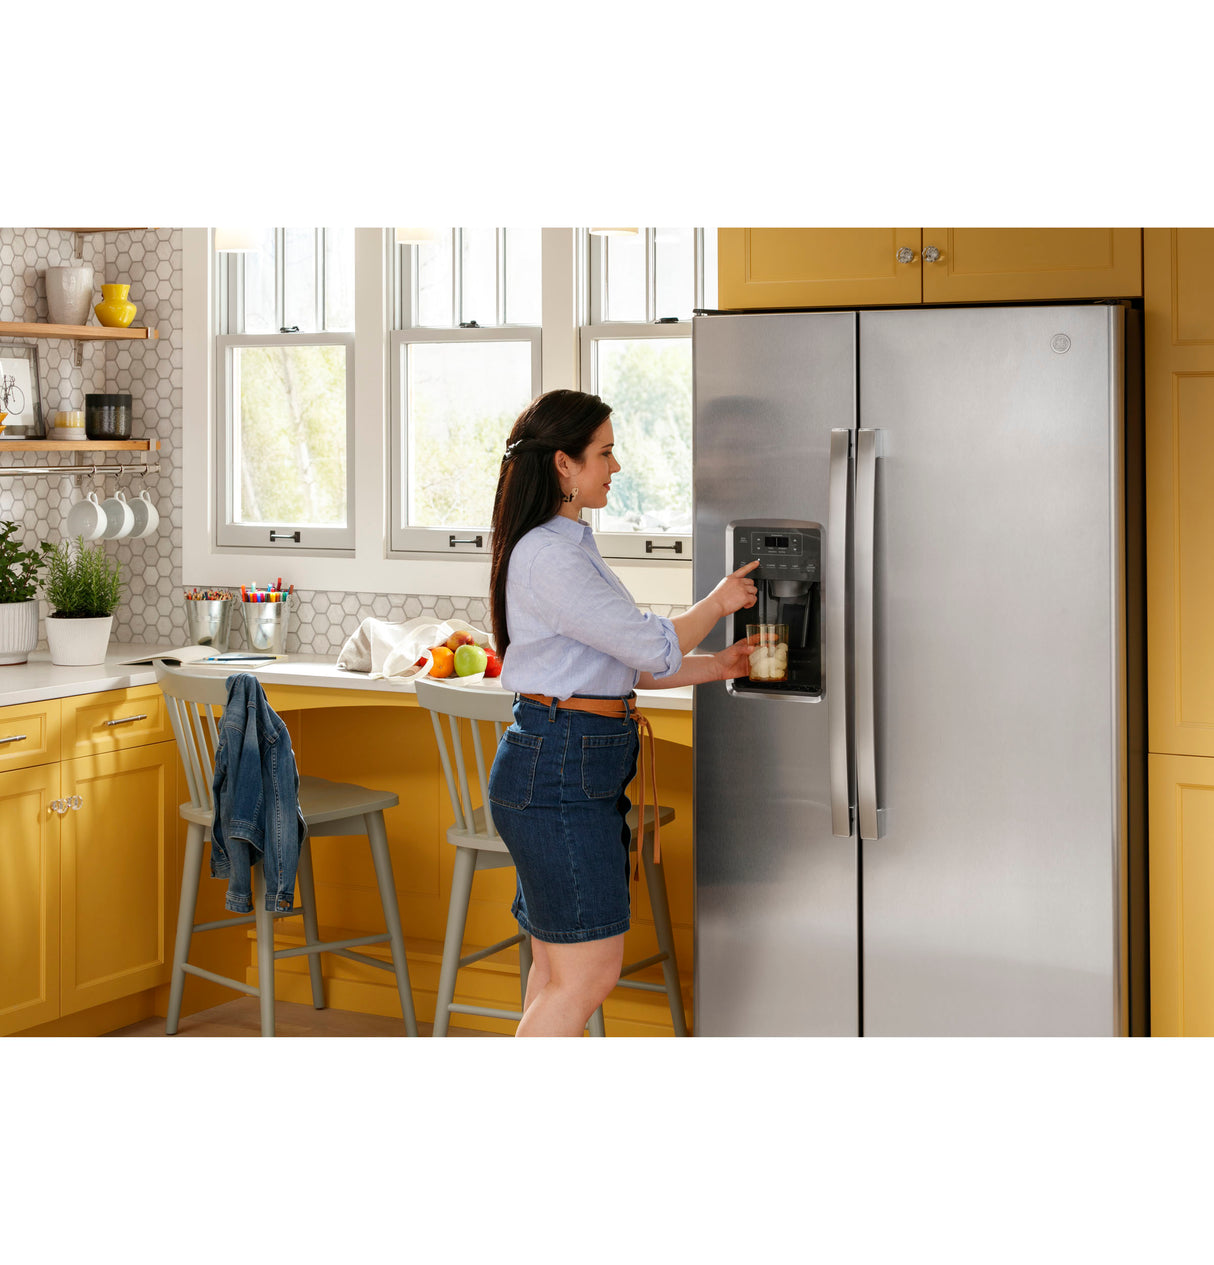 GE(R) 25.3 Cu. Ft. Side-By-Side Refrigerator - (GSS25GMPES)